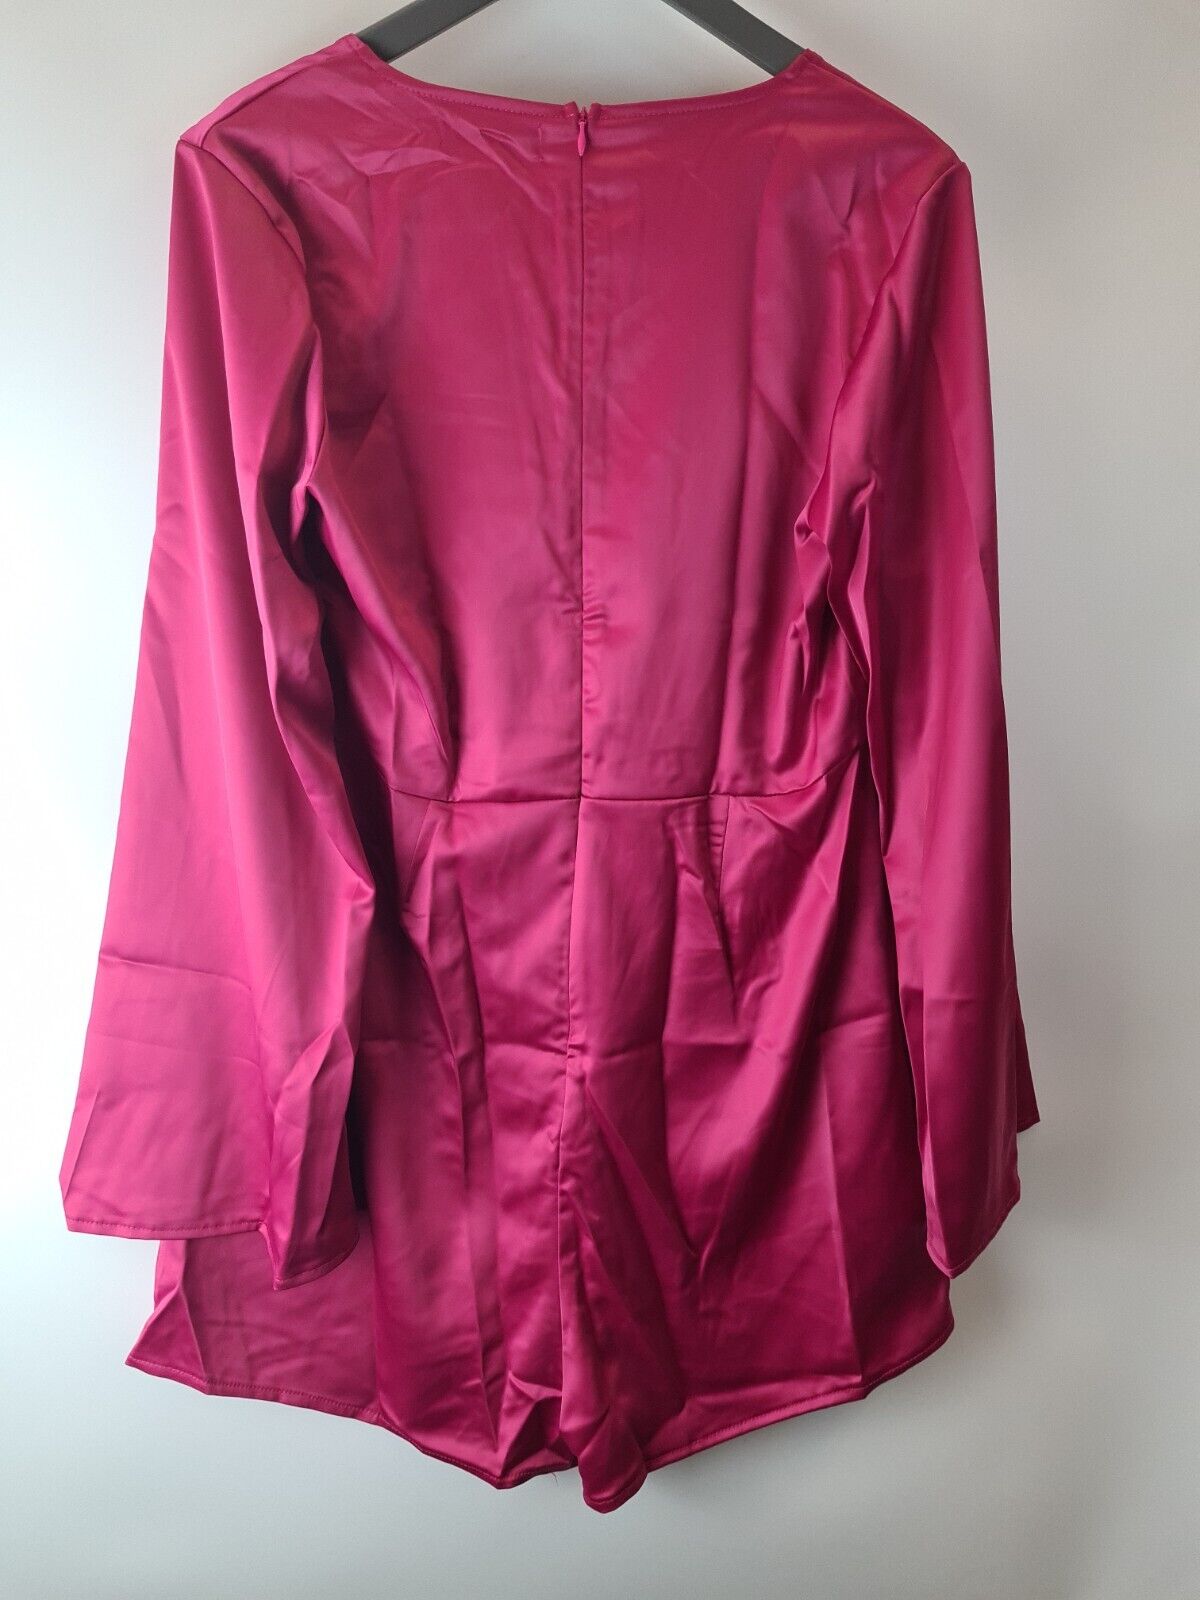 Missguided Satin Tie Front Flare Sleeves Hot Pink Playsuit Size 16 **** V44